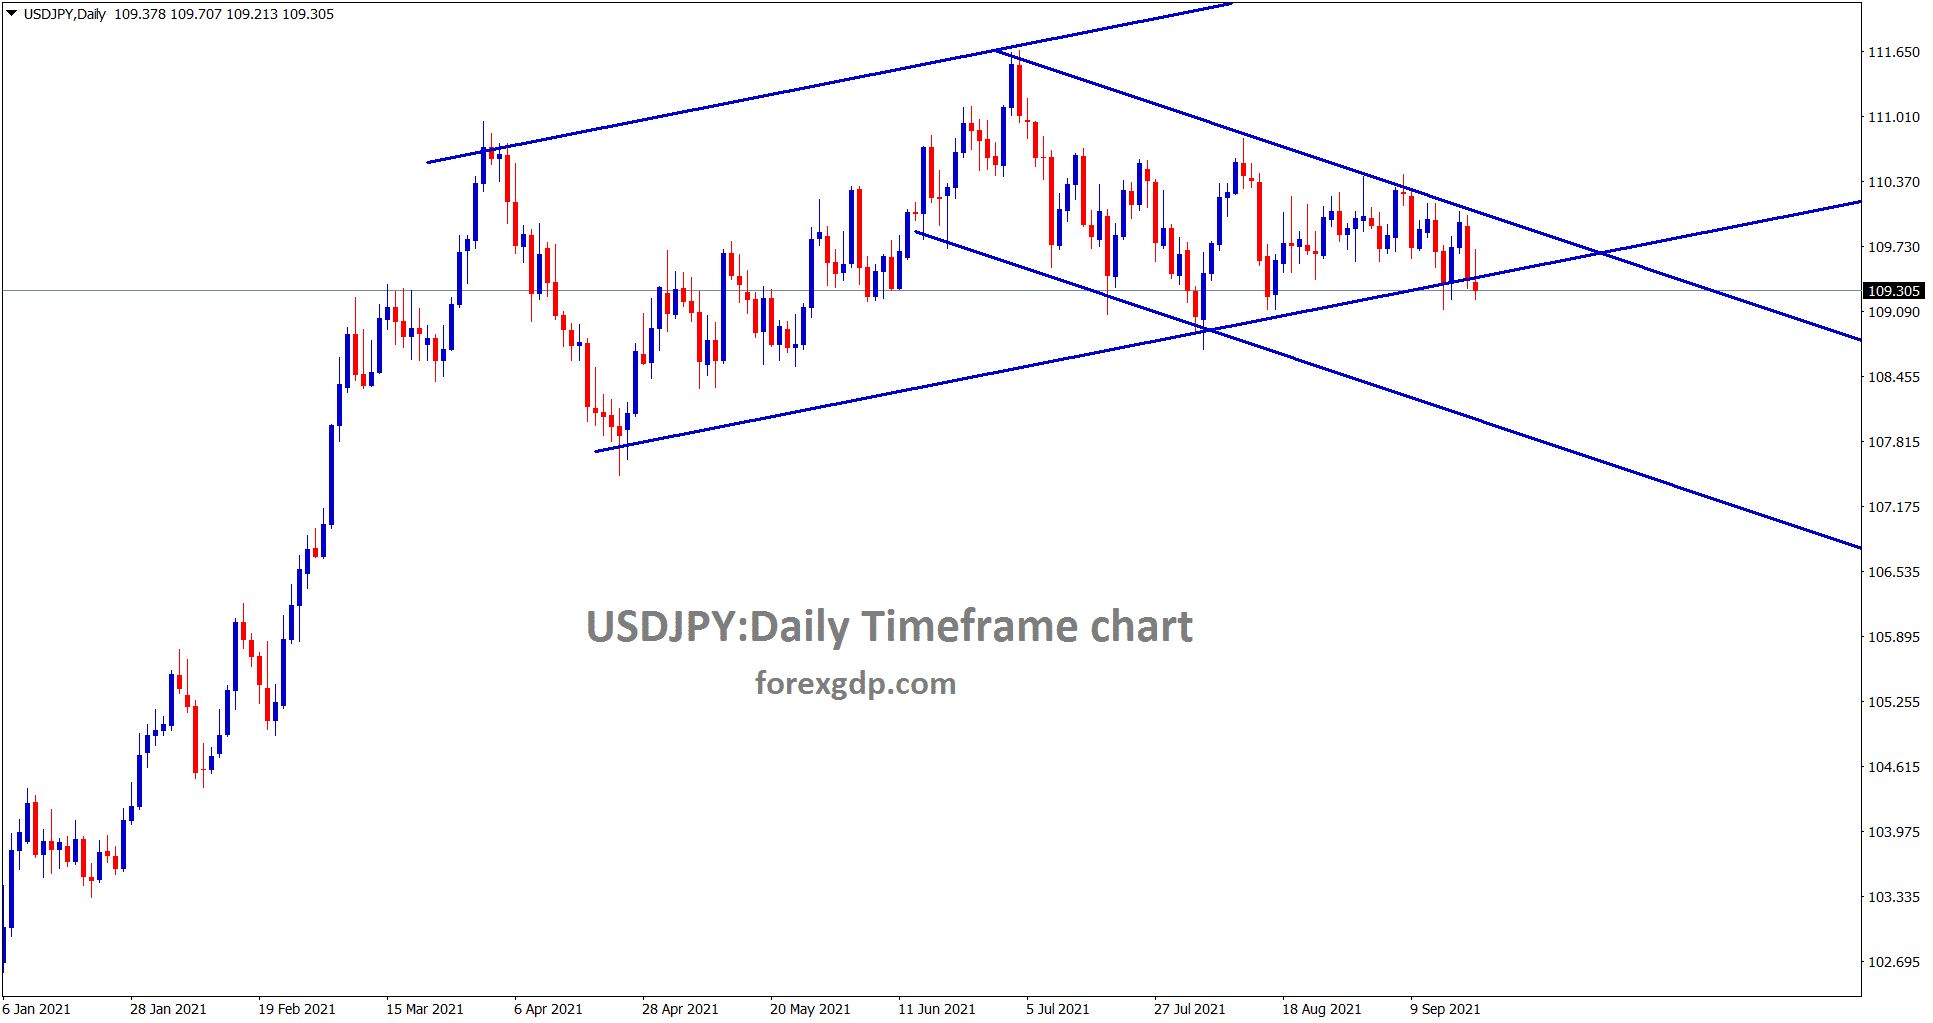 USDJPY is still moving between the channels